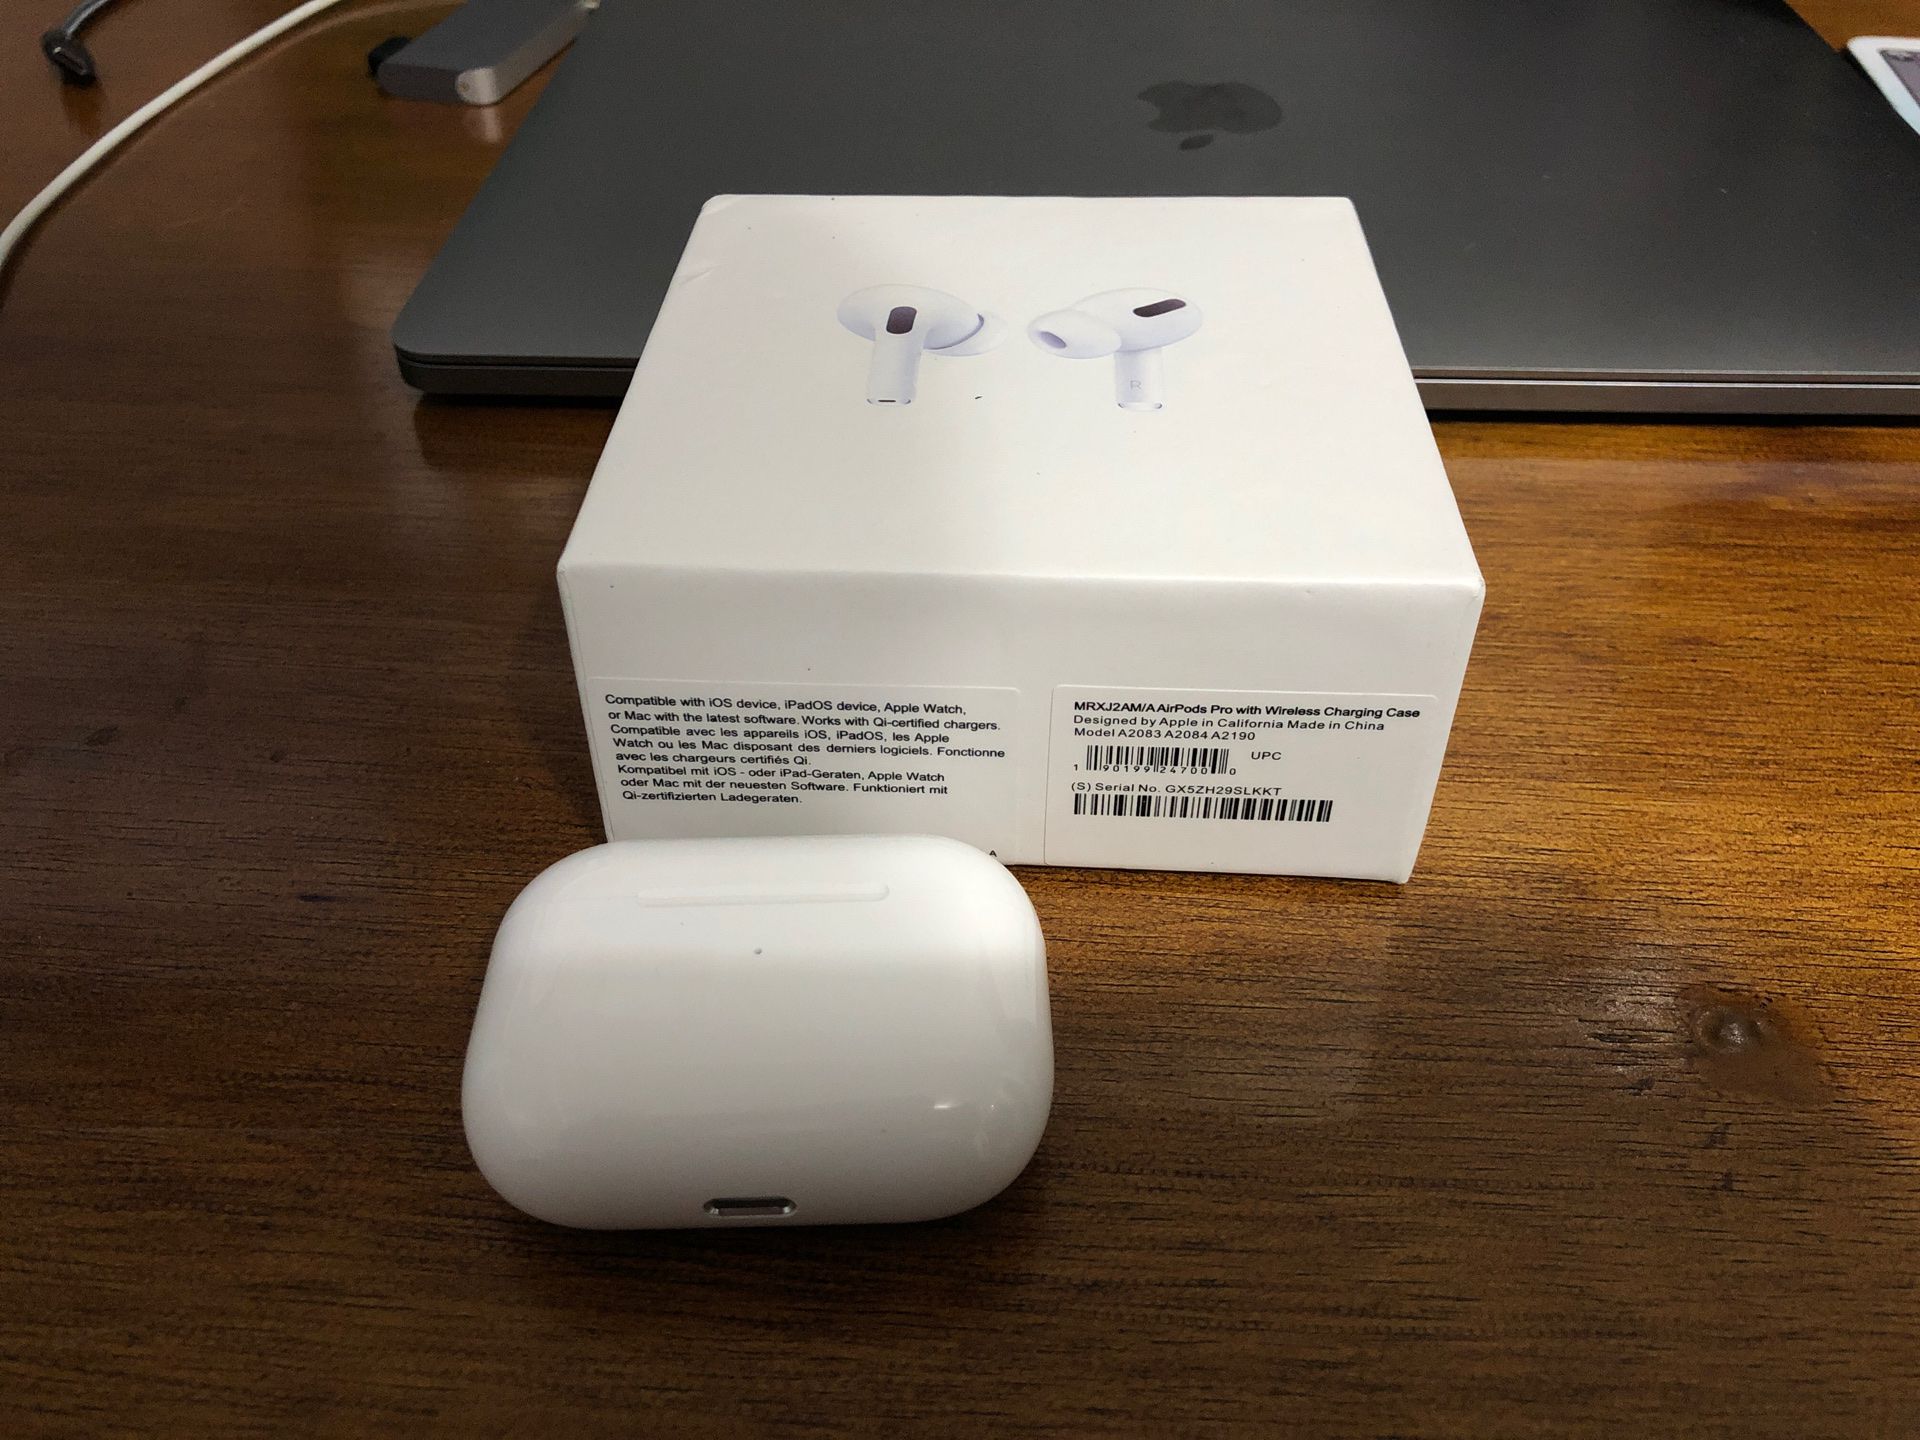 AirPod pros (barely worn)